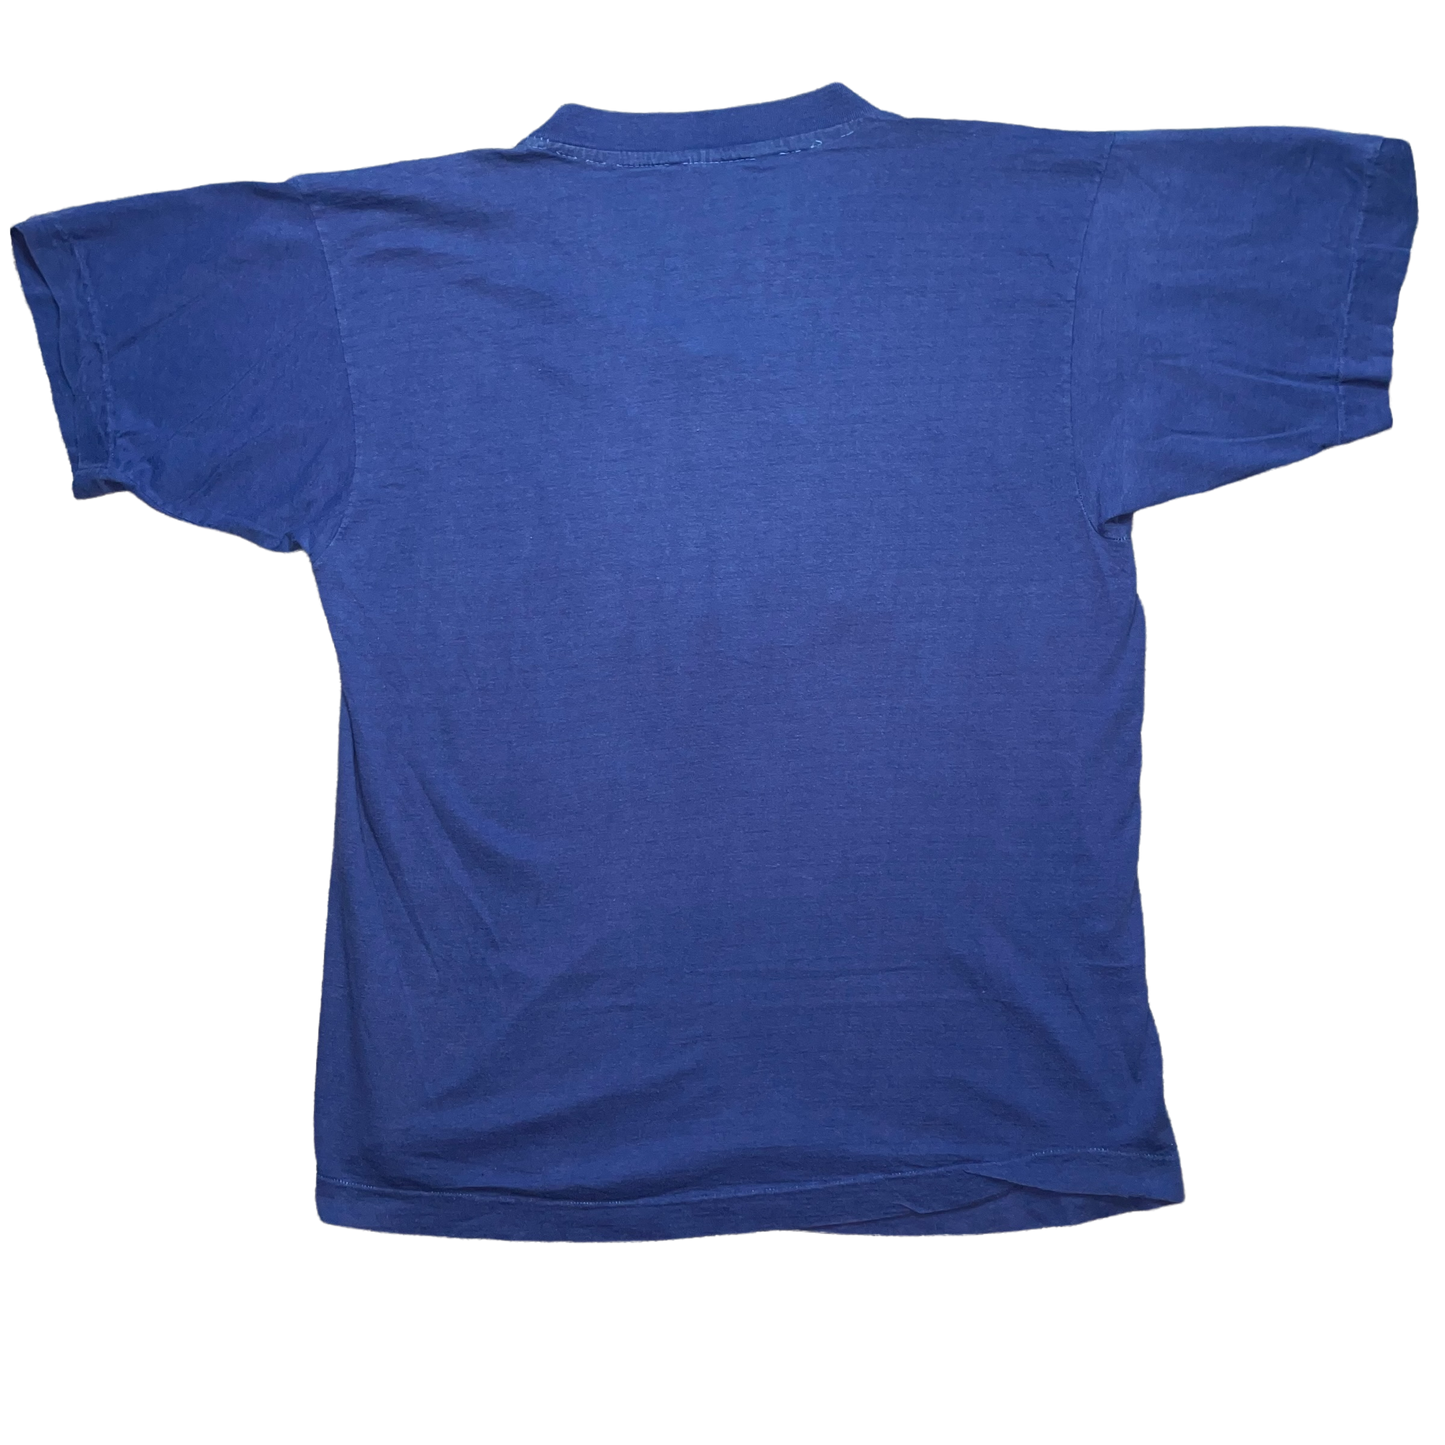 1980s Grateful Dead What a Long Strange Trip It's Been Hand Embroidered Blue Graphic Tee